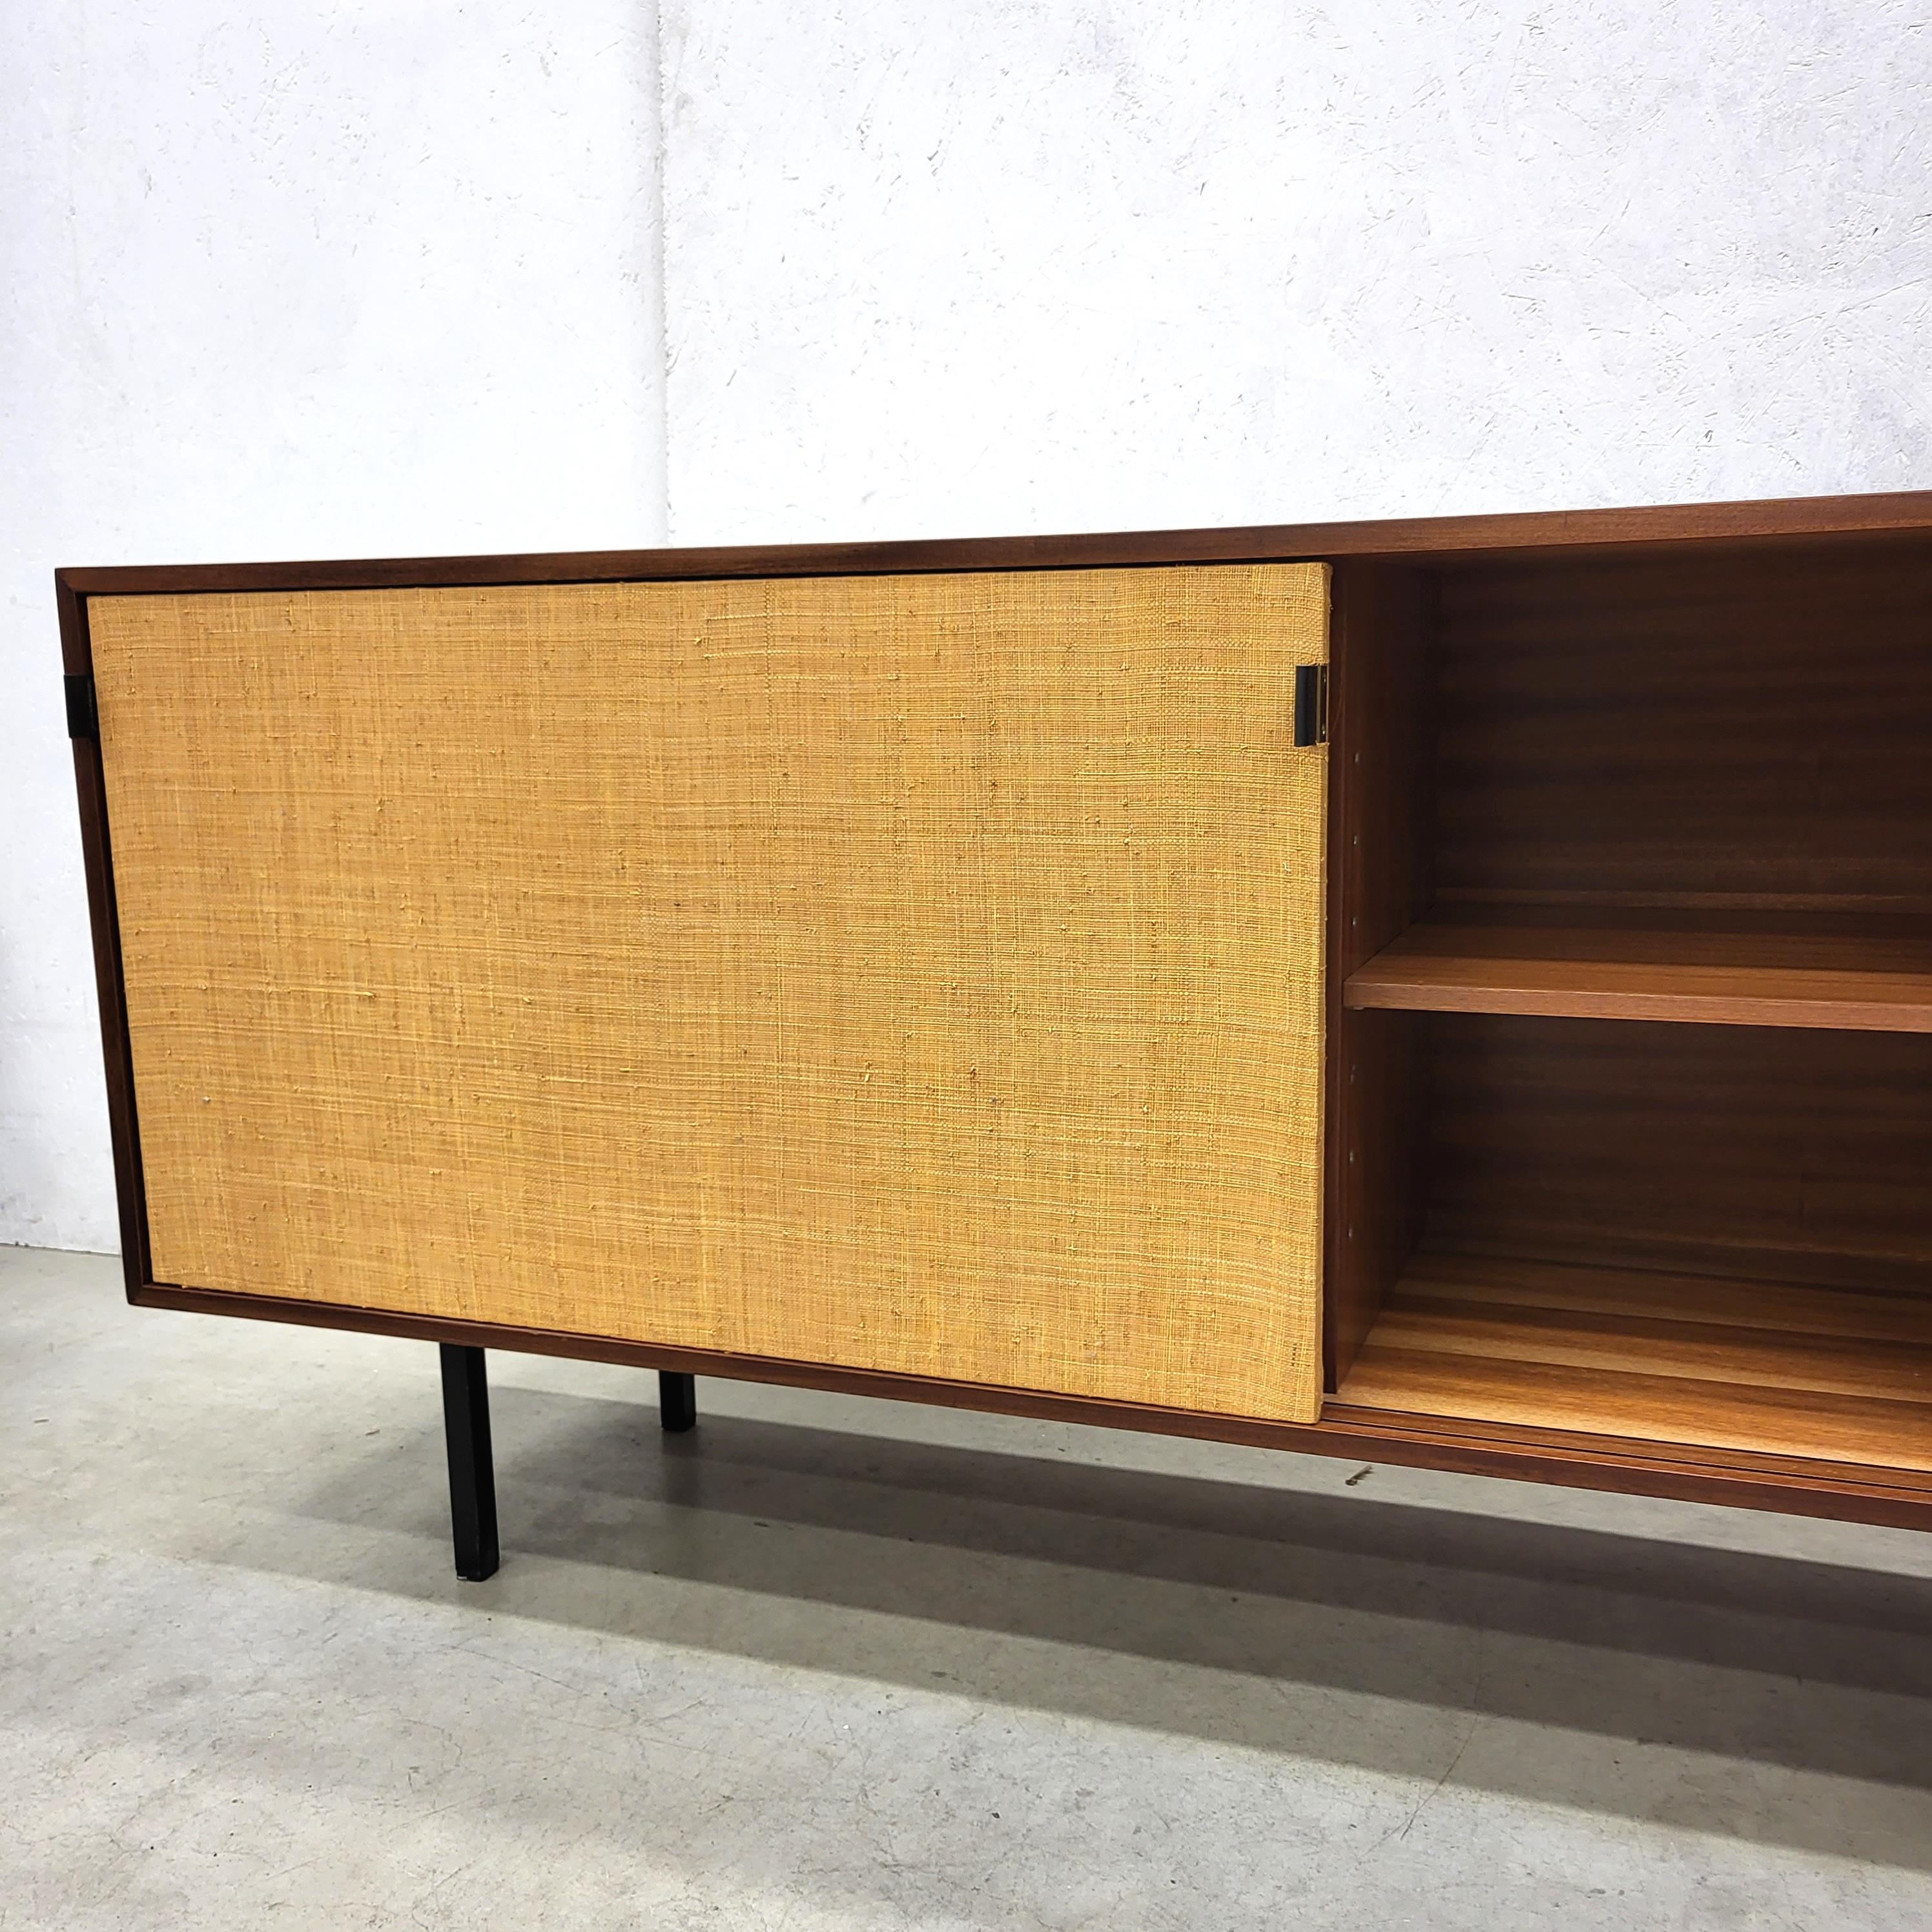 German Florence Knoll Seagrass Sideboard Model 116 by Knoll, 1952 For Sale